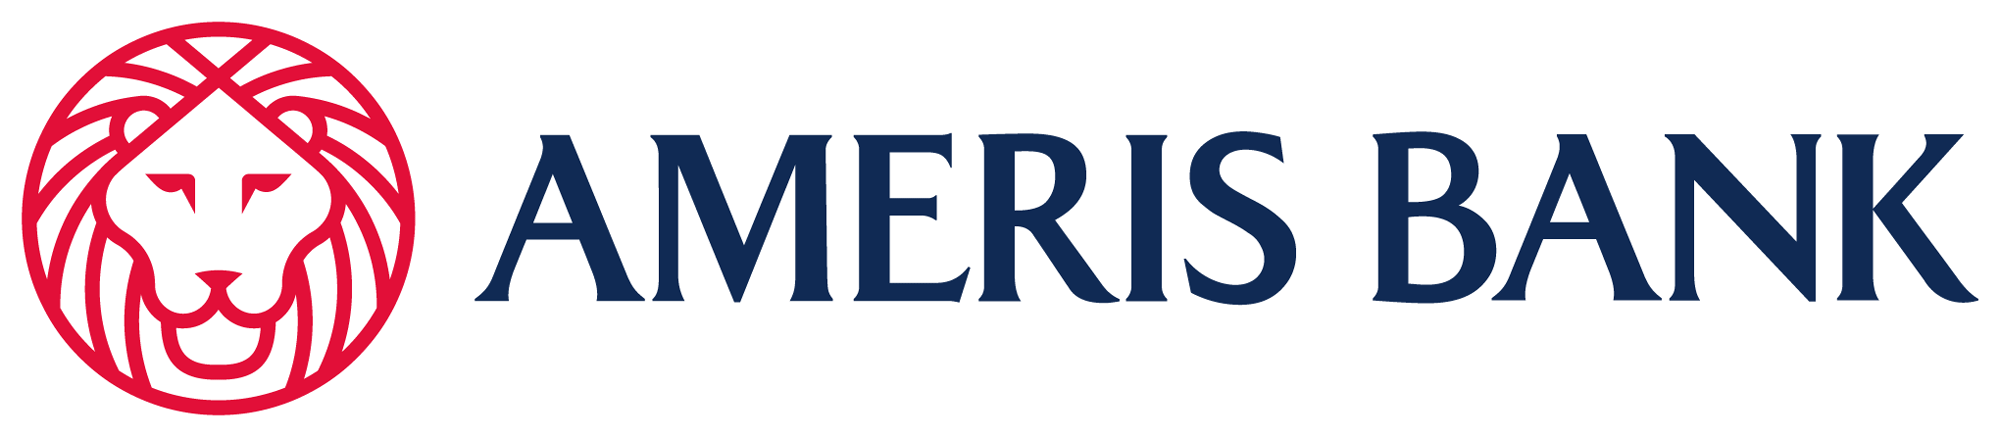 New Logo and Identity for Ameris Bank by Matchstic